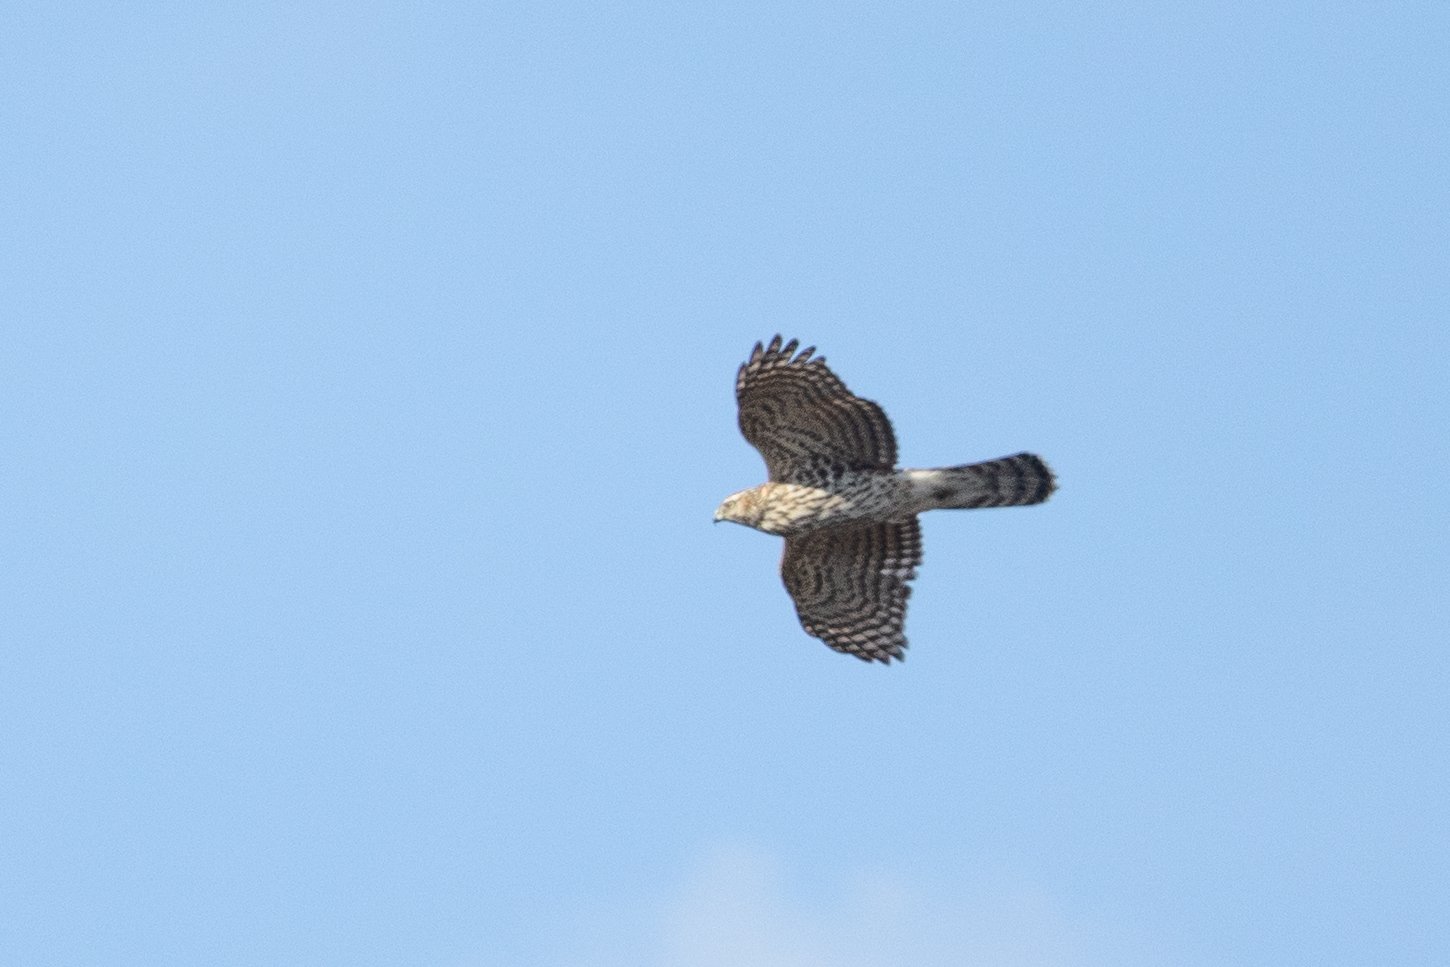 We will keep an eye out for Northern Goshawk on our tour of the region